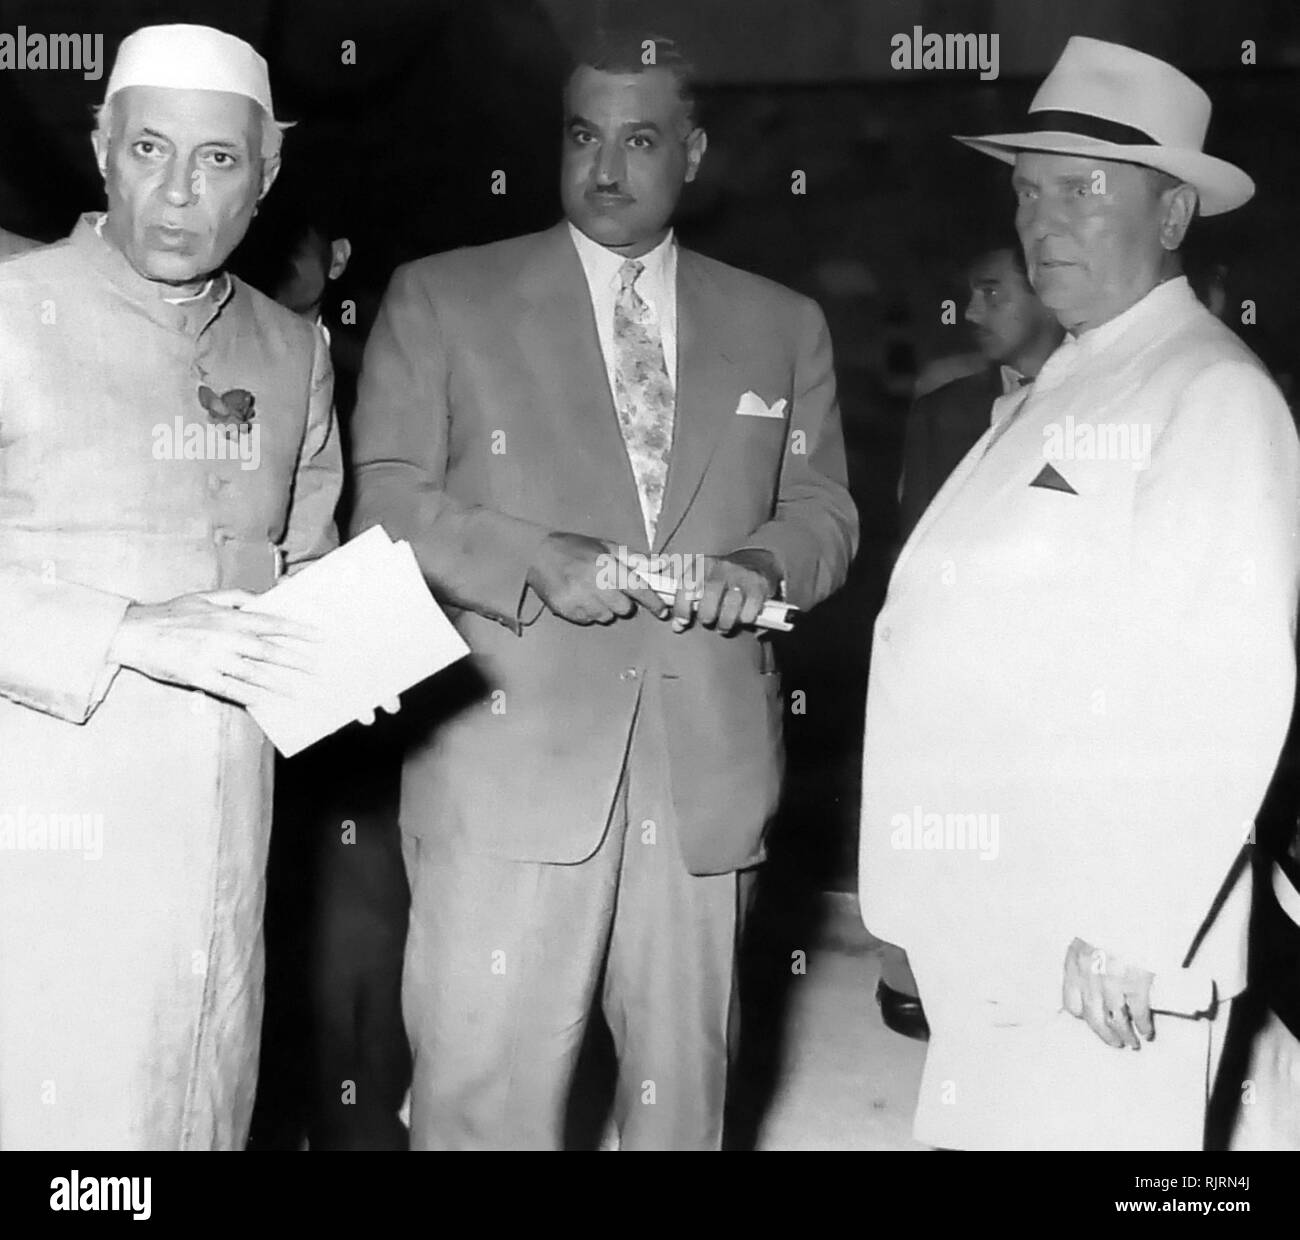 Nehru, Nasser and Tito meet to sign the establishment of the Non-Aligned Movement. 1956. The Non-Aligned Movement, founded on the Brijuni islands in Yugoslavia in 1956, and was formalized by signing the Declaration of Brijuni on July 19th, 1956. The Declaration was signed by Yugoslavia's president, Josip Broz Tito, India's first prime minister Jawaharlal Nehru and Egypt's second president, Gamal Abdel Nasser. Stock Photo